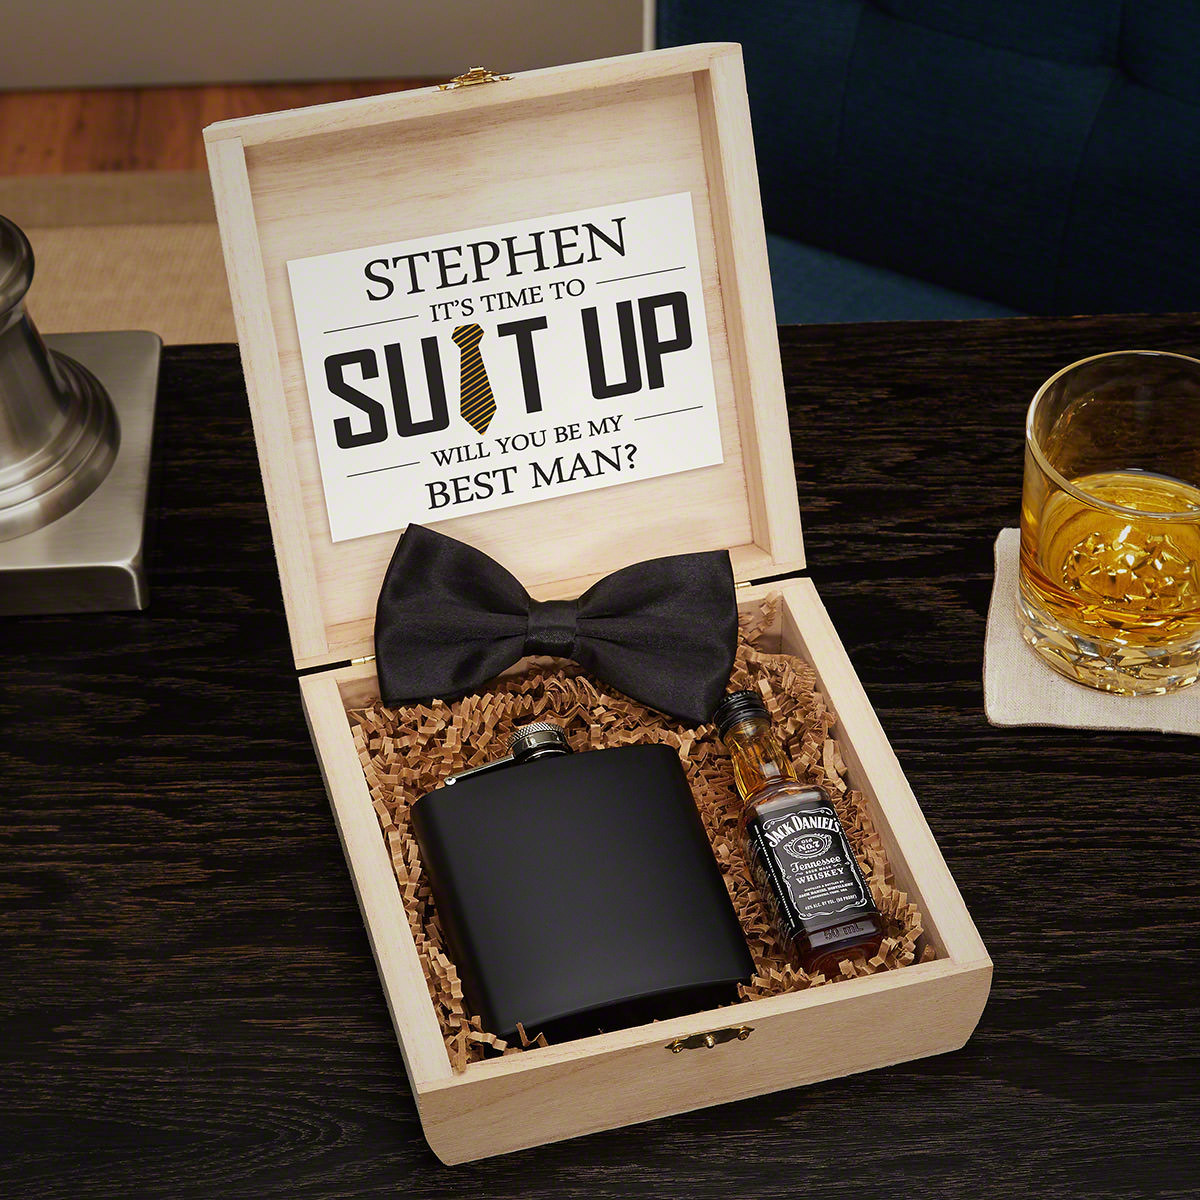 Best Man Gift Ideas From Groom
 Personalized Groomsmen Gifts and Wooden Crate Set